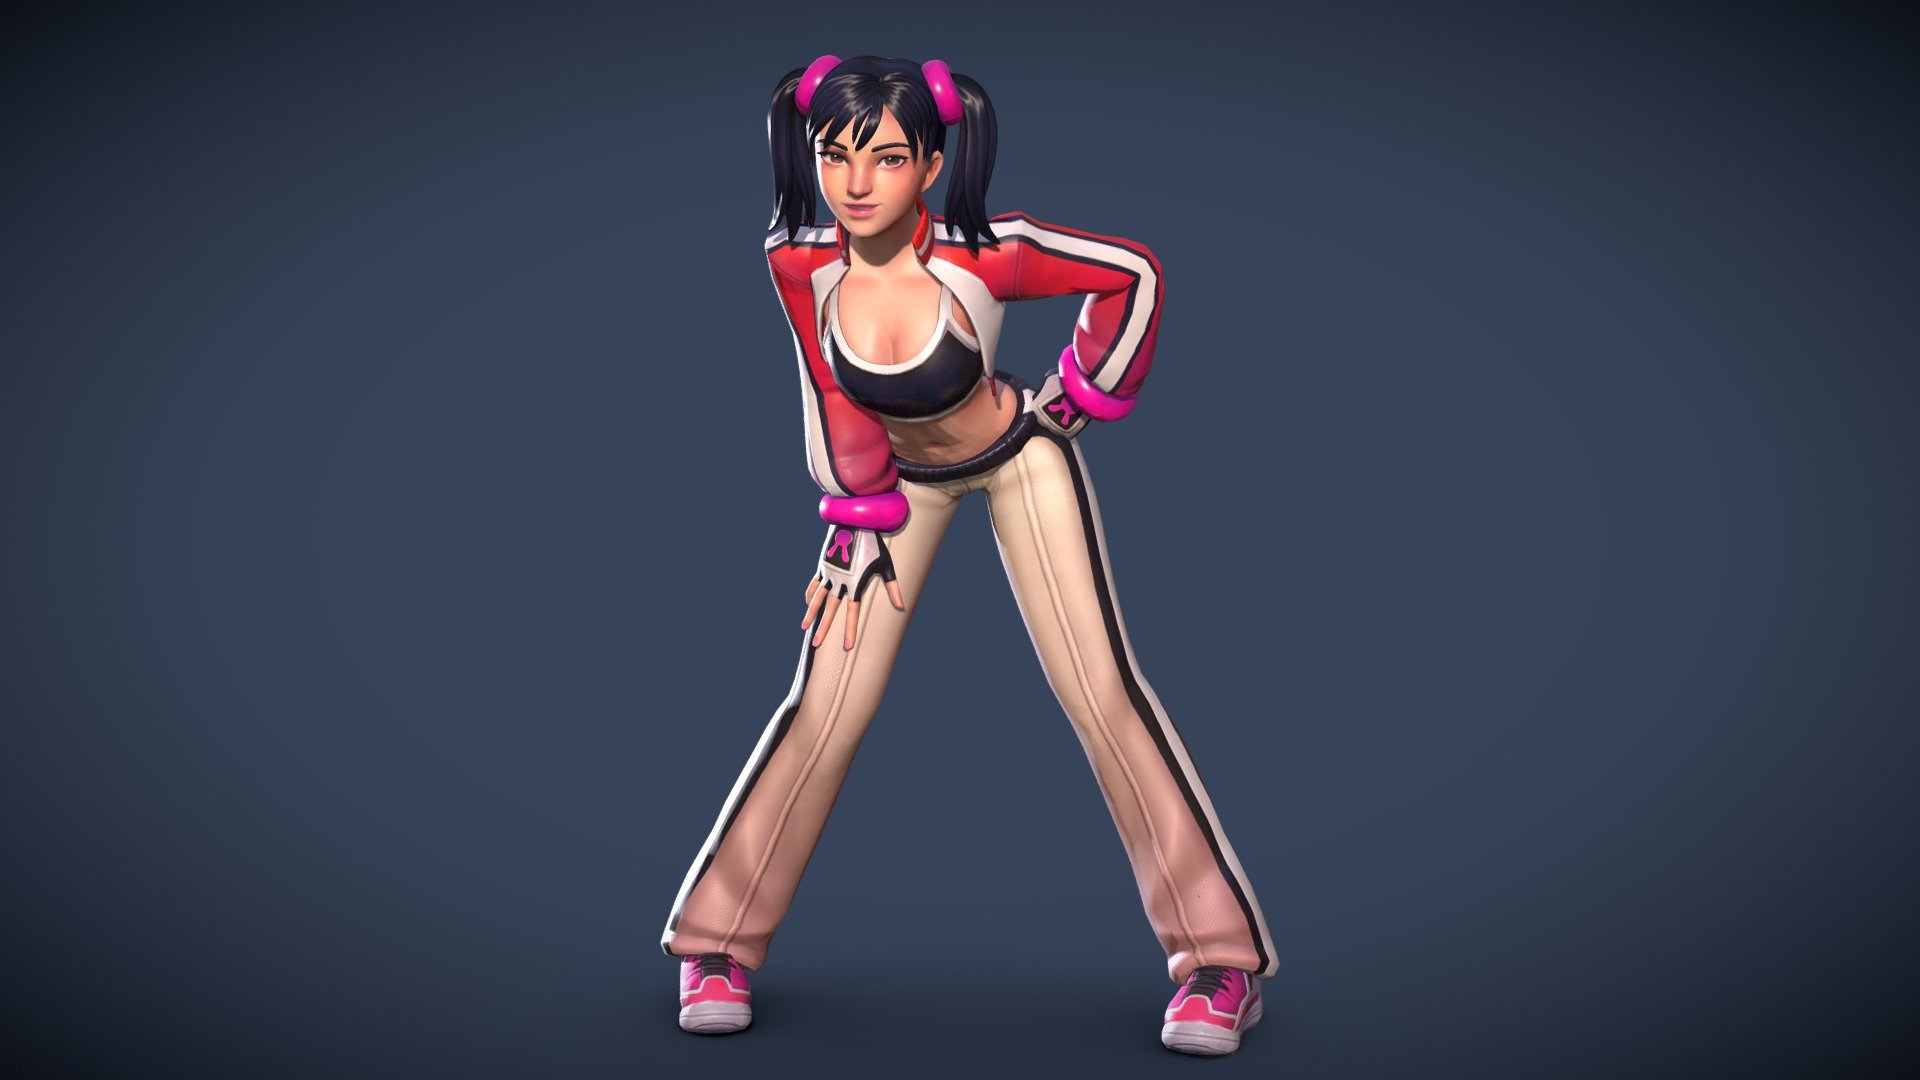 A Game-Ready model of one of my favorite Tekken characters! This was started for a Discord Art Challenge, and I wanted to keep working on it after the fact. I haven't done a full PBR model in a hot sec, so it was fun to get back into it with all my new knowledge.

Check it out on Artstation as well! - Ling Xiaoyu - 3D model by Dechta 3d model